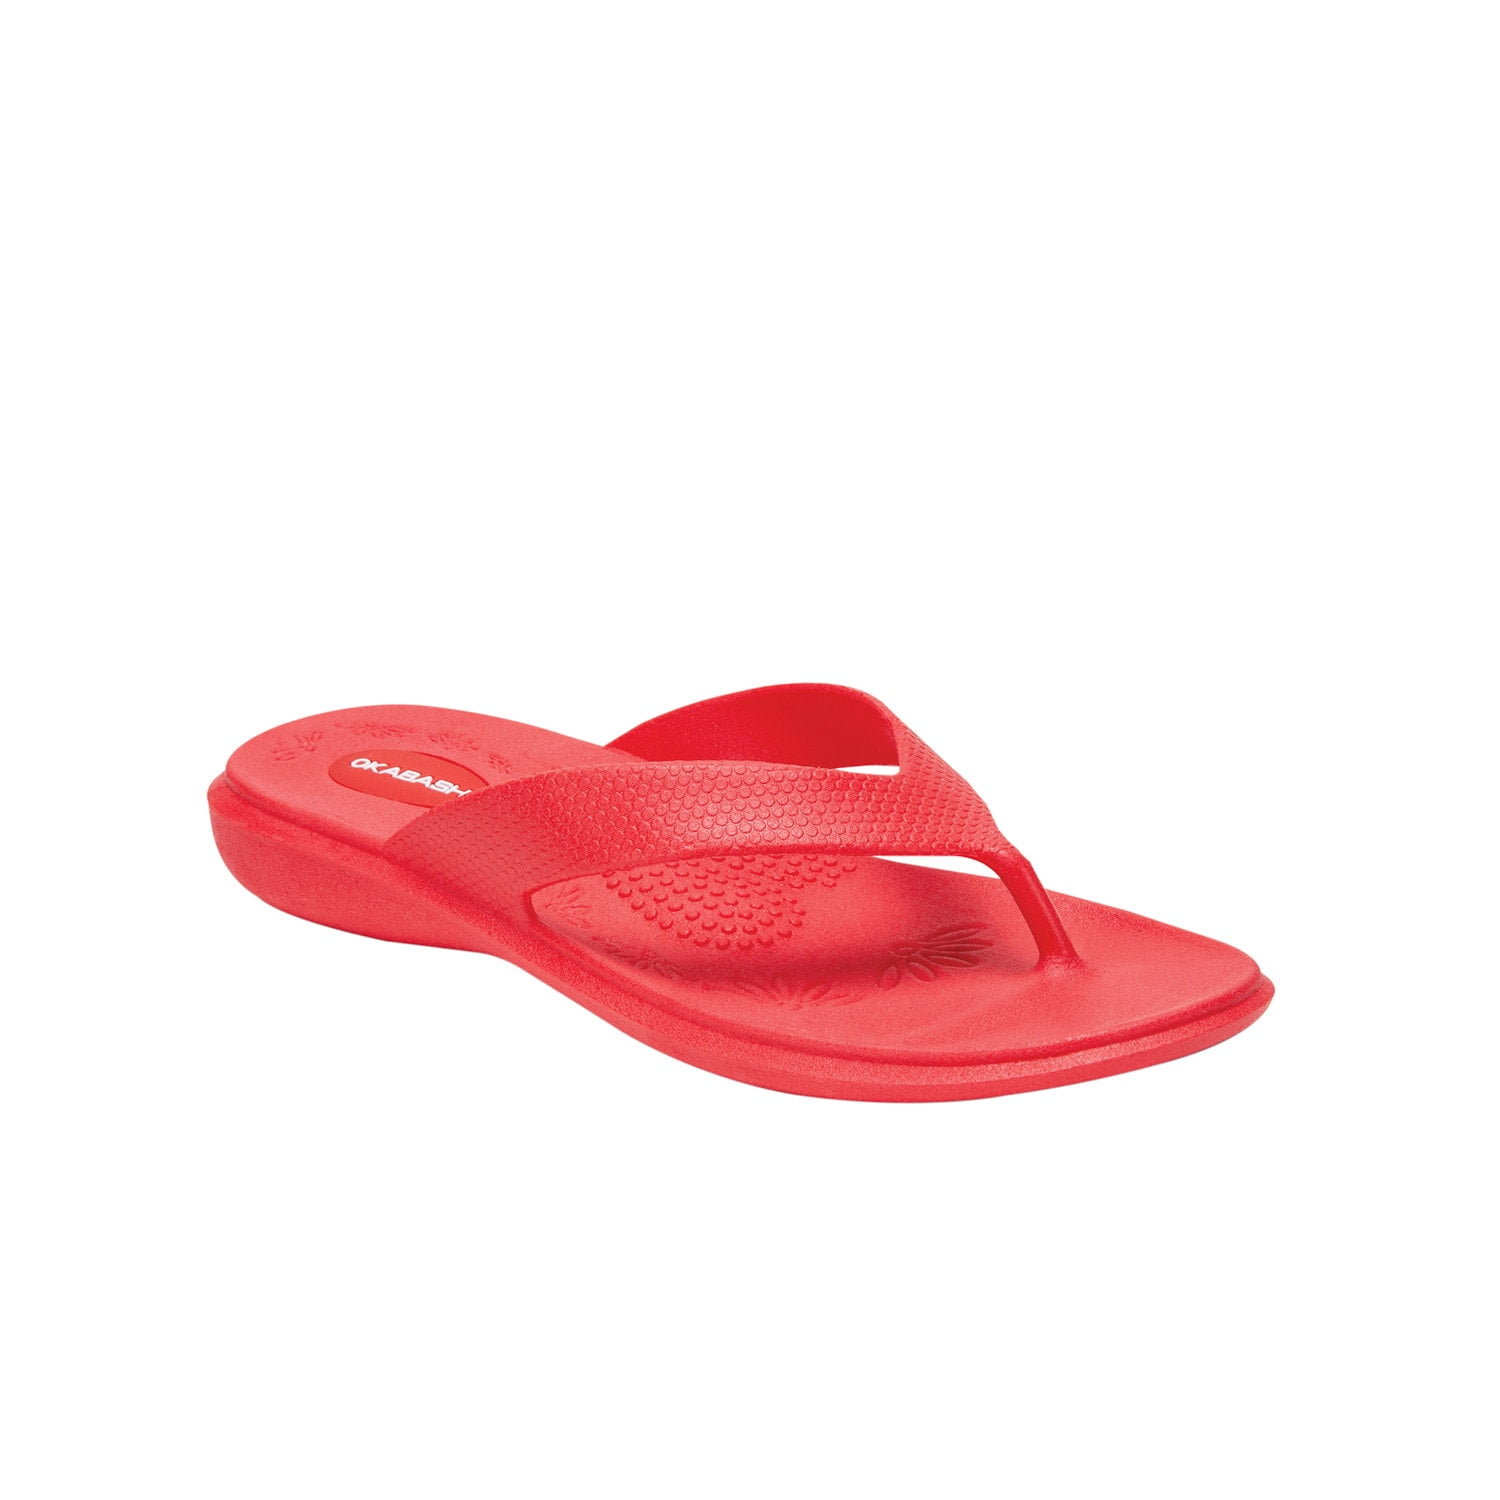 Baha, Comfortable Women's Flip Flop, Made in the USA